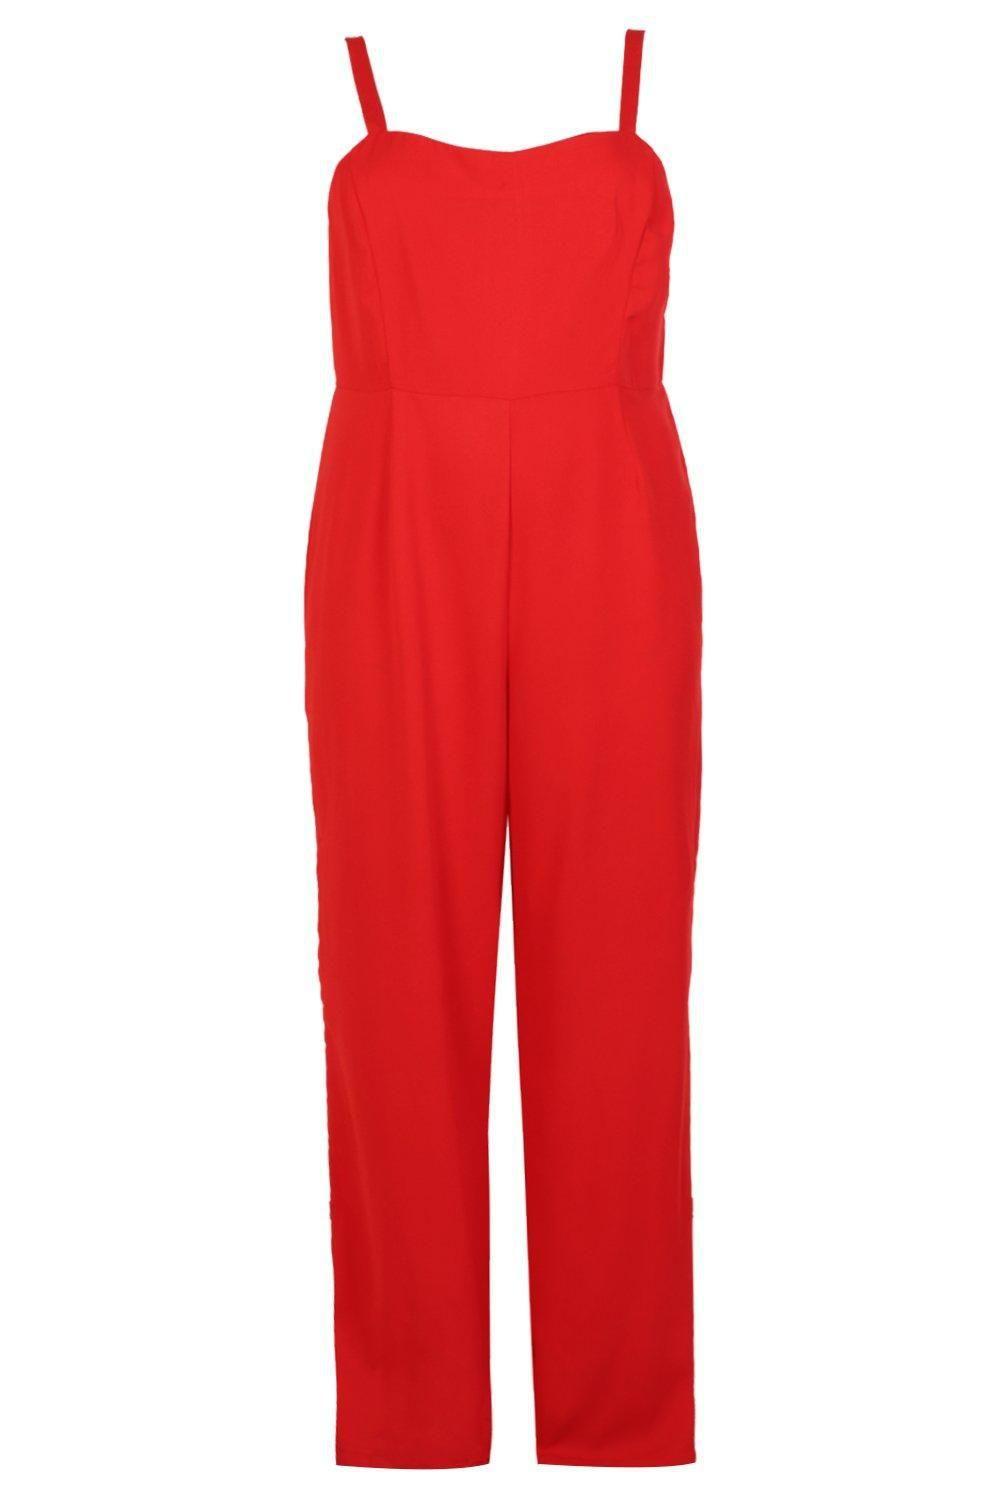 Square in Red Plus Logo - Boohoo Plus Square Neck Wide Leg Jumpsuit in Red